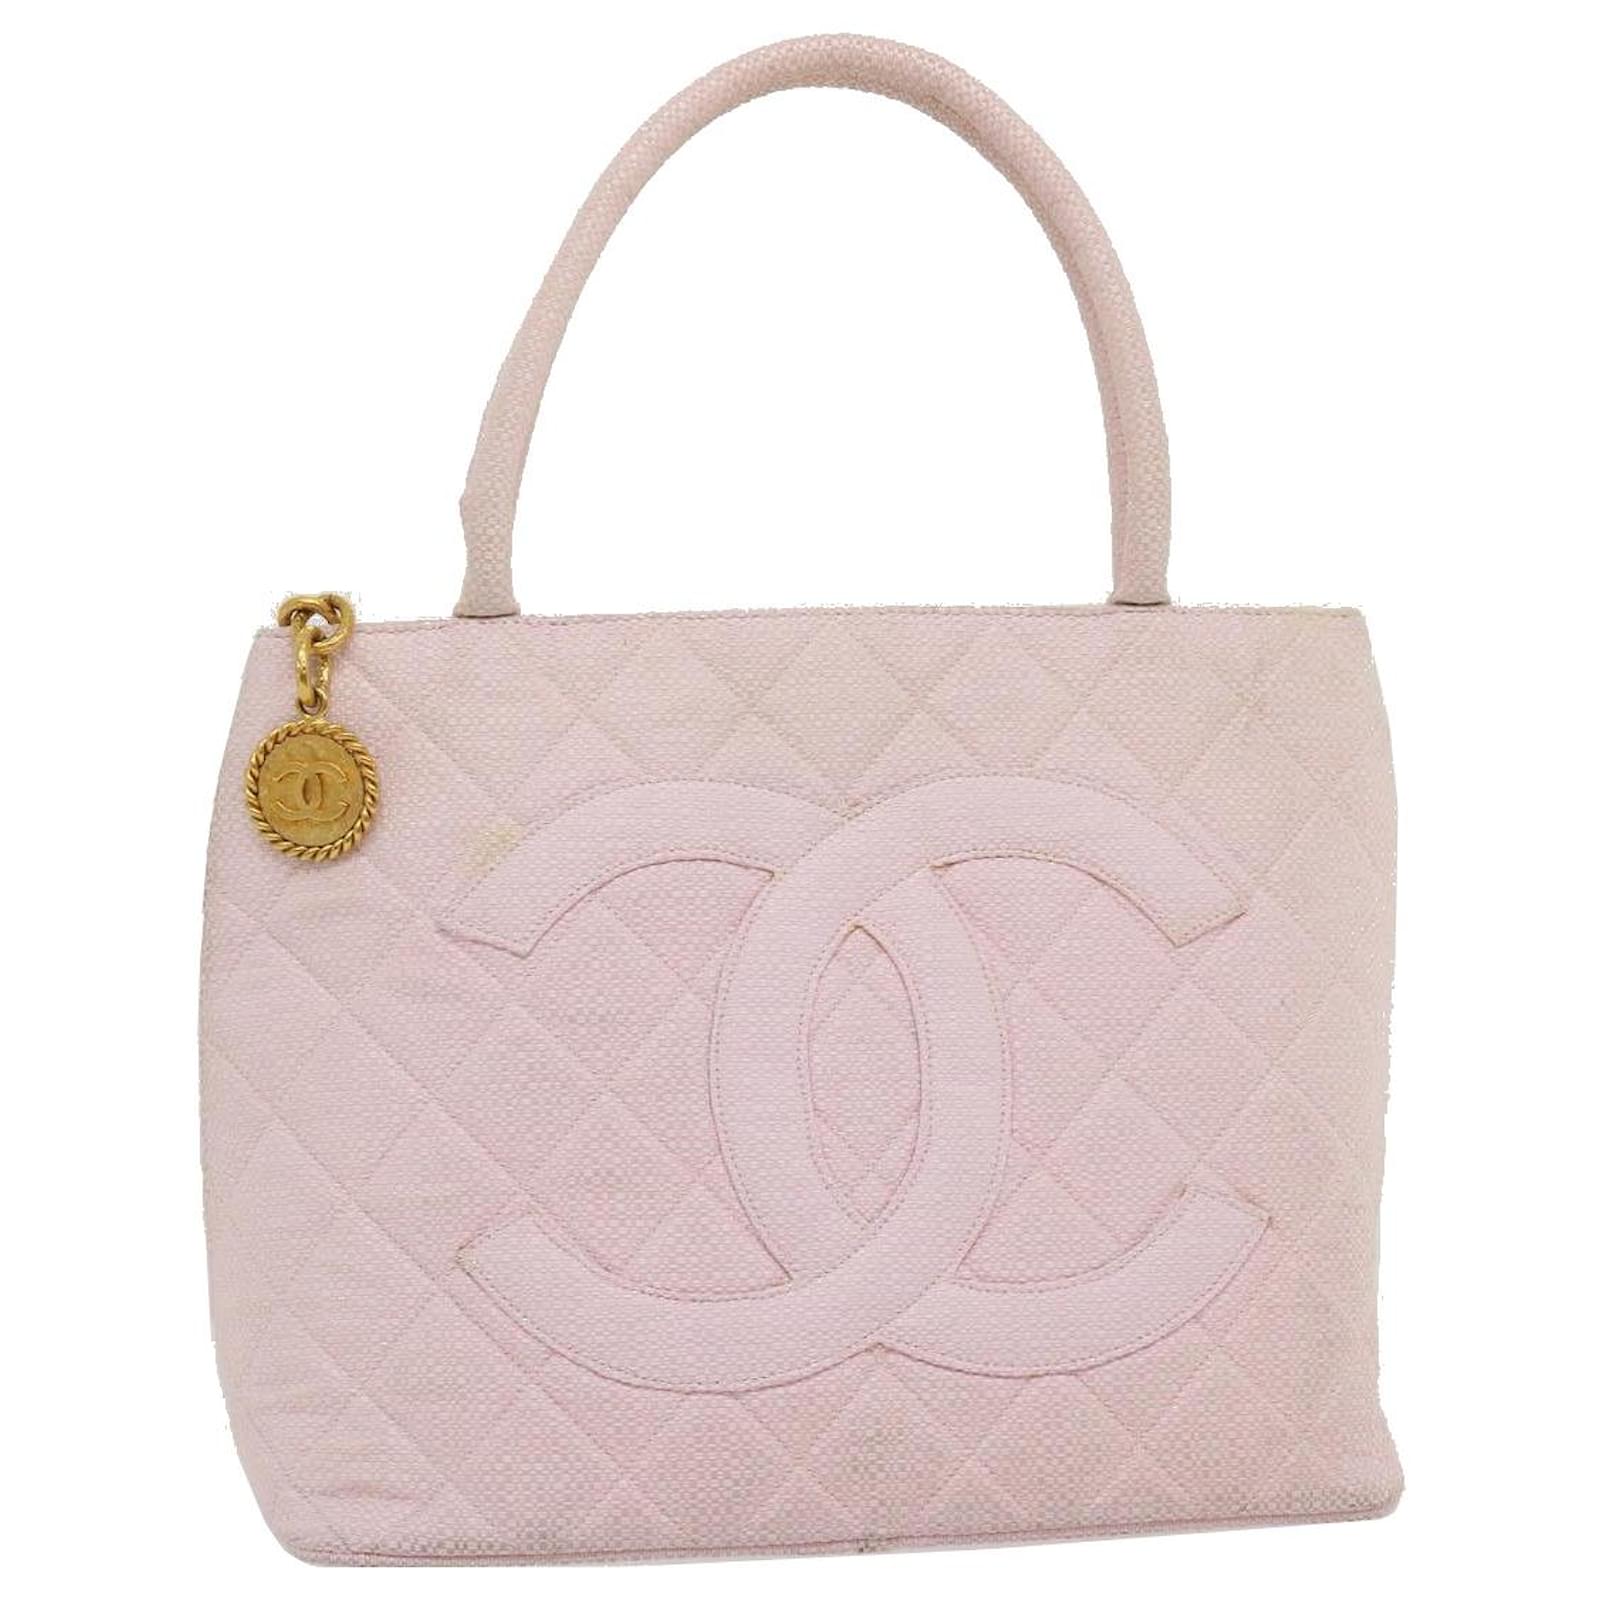 COTTON QUILTED CARRY BAG PINK